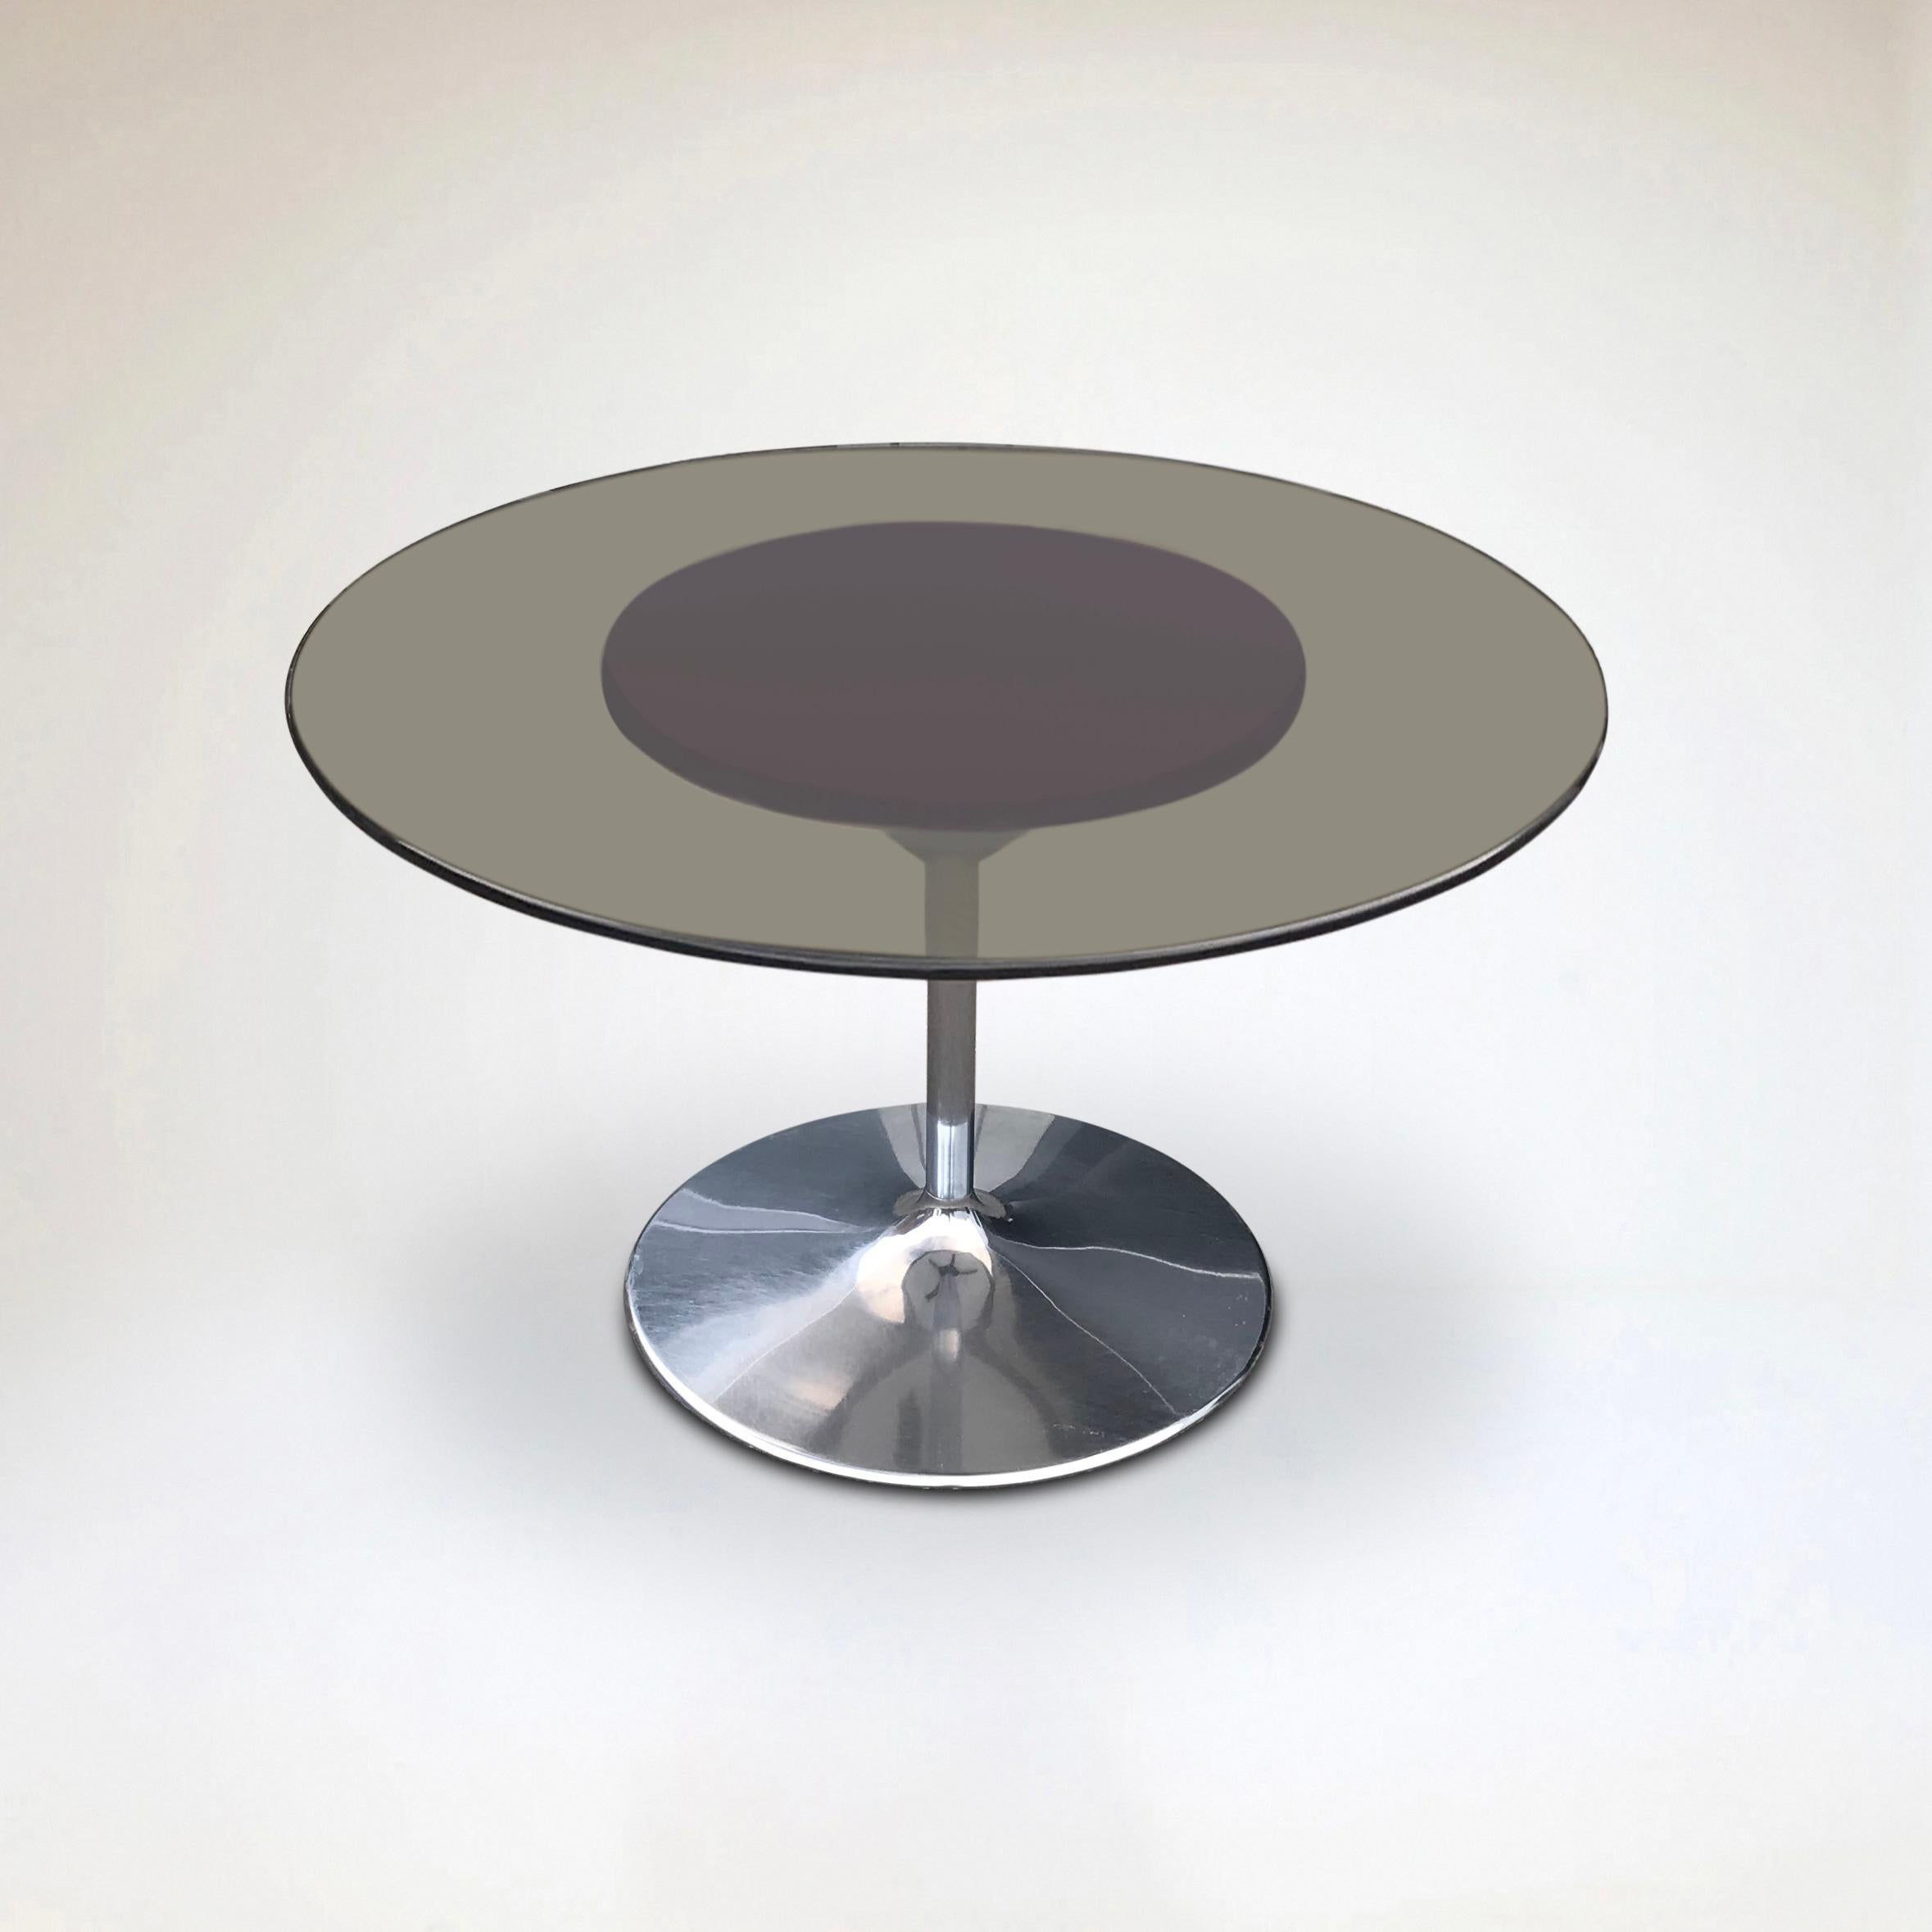 A rare Tulip dining table by Chromcraft USA in typical space age fashion.

Tulip shaped metal foot with a leather pad and a smoked glass top on top.

The top lays on a round brown leather surface, which provides enough friction to secure the glass